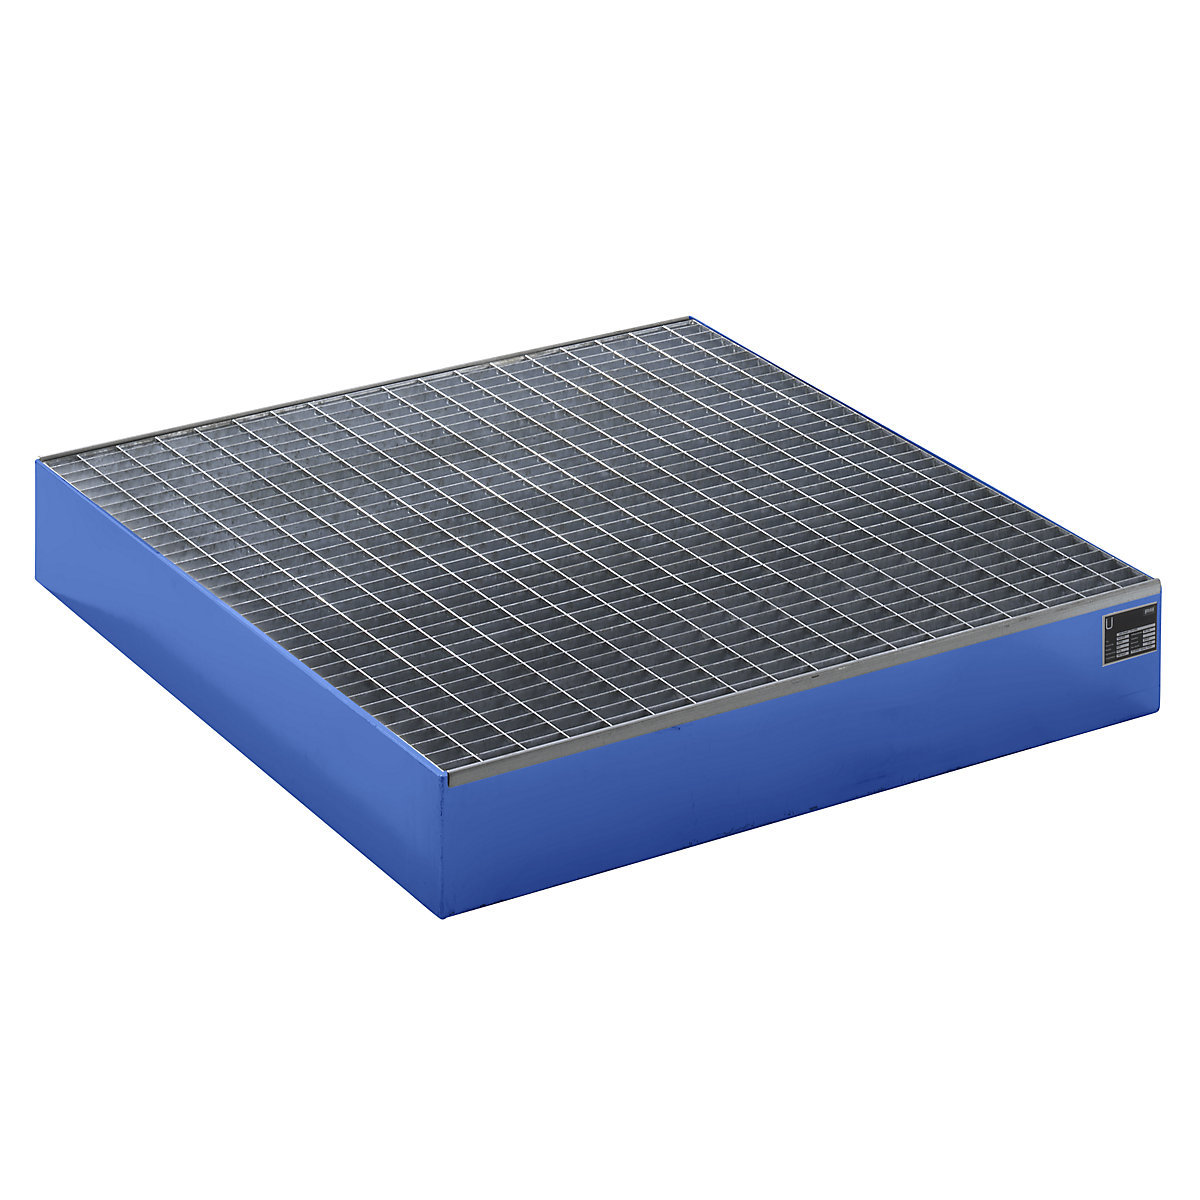 EUROKRAFTbasic – Pallet sump tray, LxWxH 1200 x 1200 x 185 mm, blue RAL 5012, with grate